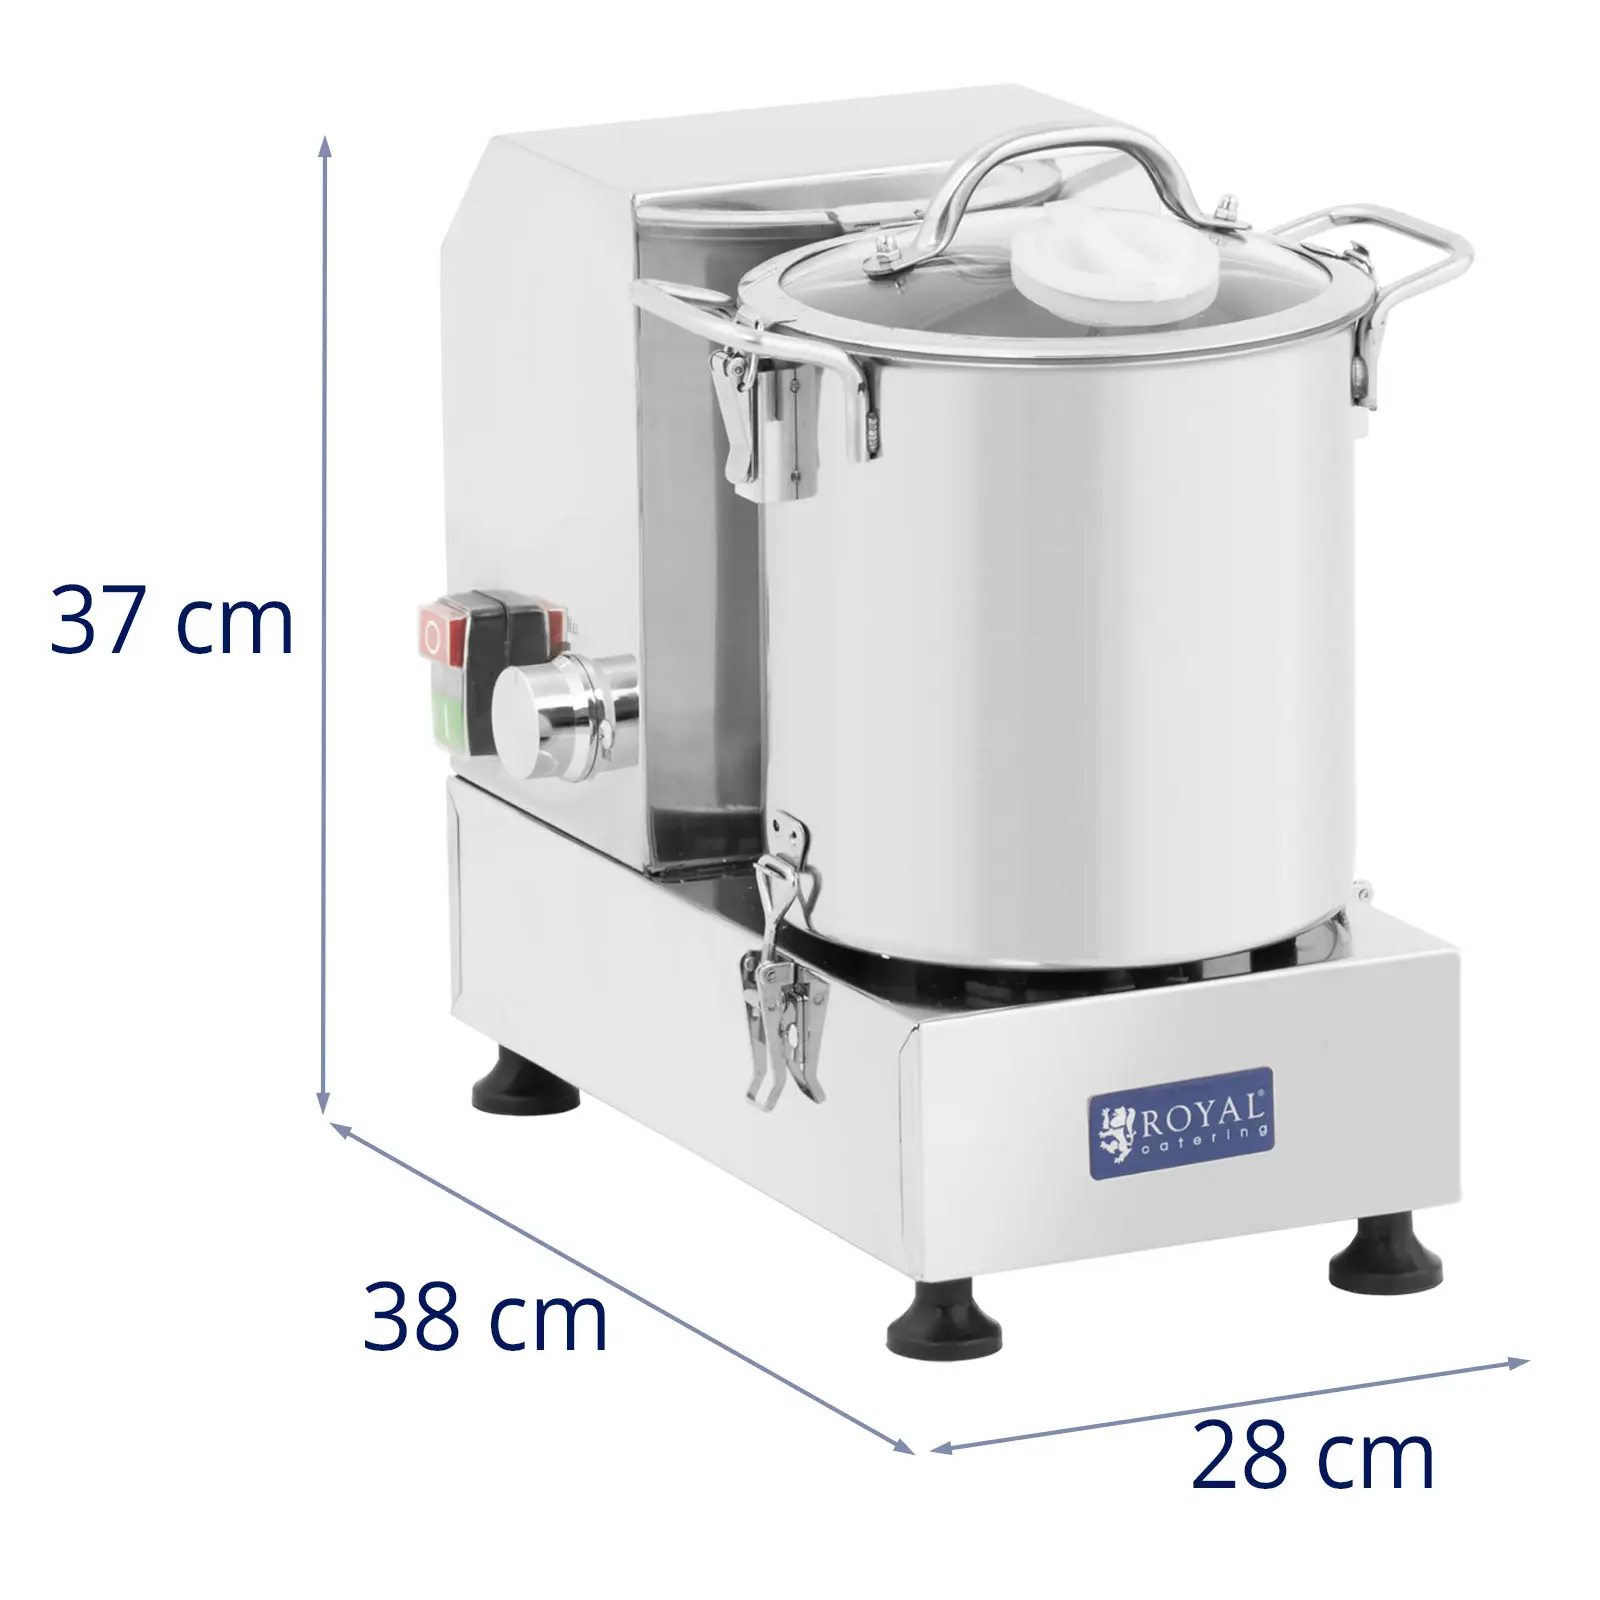 Bowl Cutter - 1600 - 3200 rpm - 6 l - Royal Catering